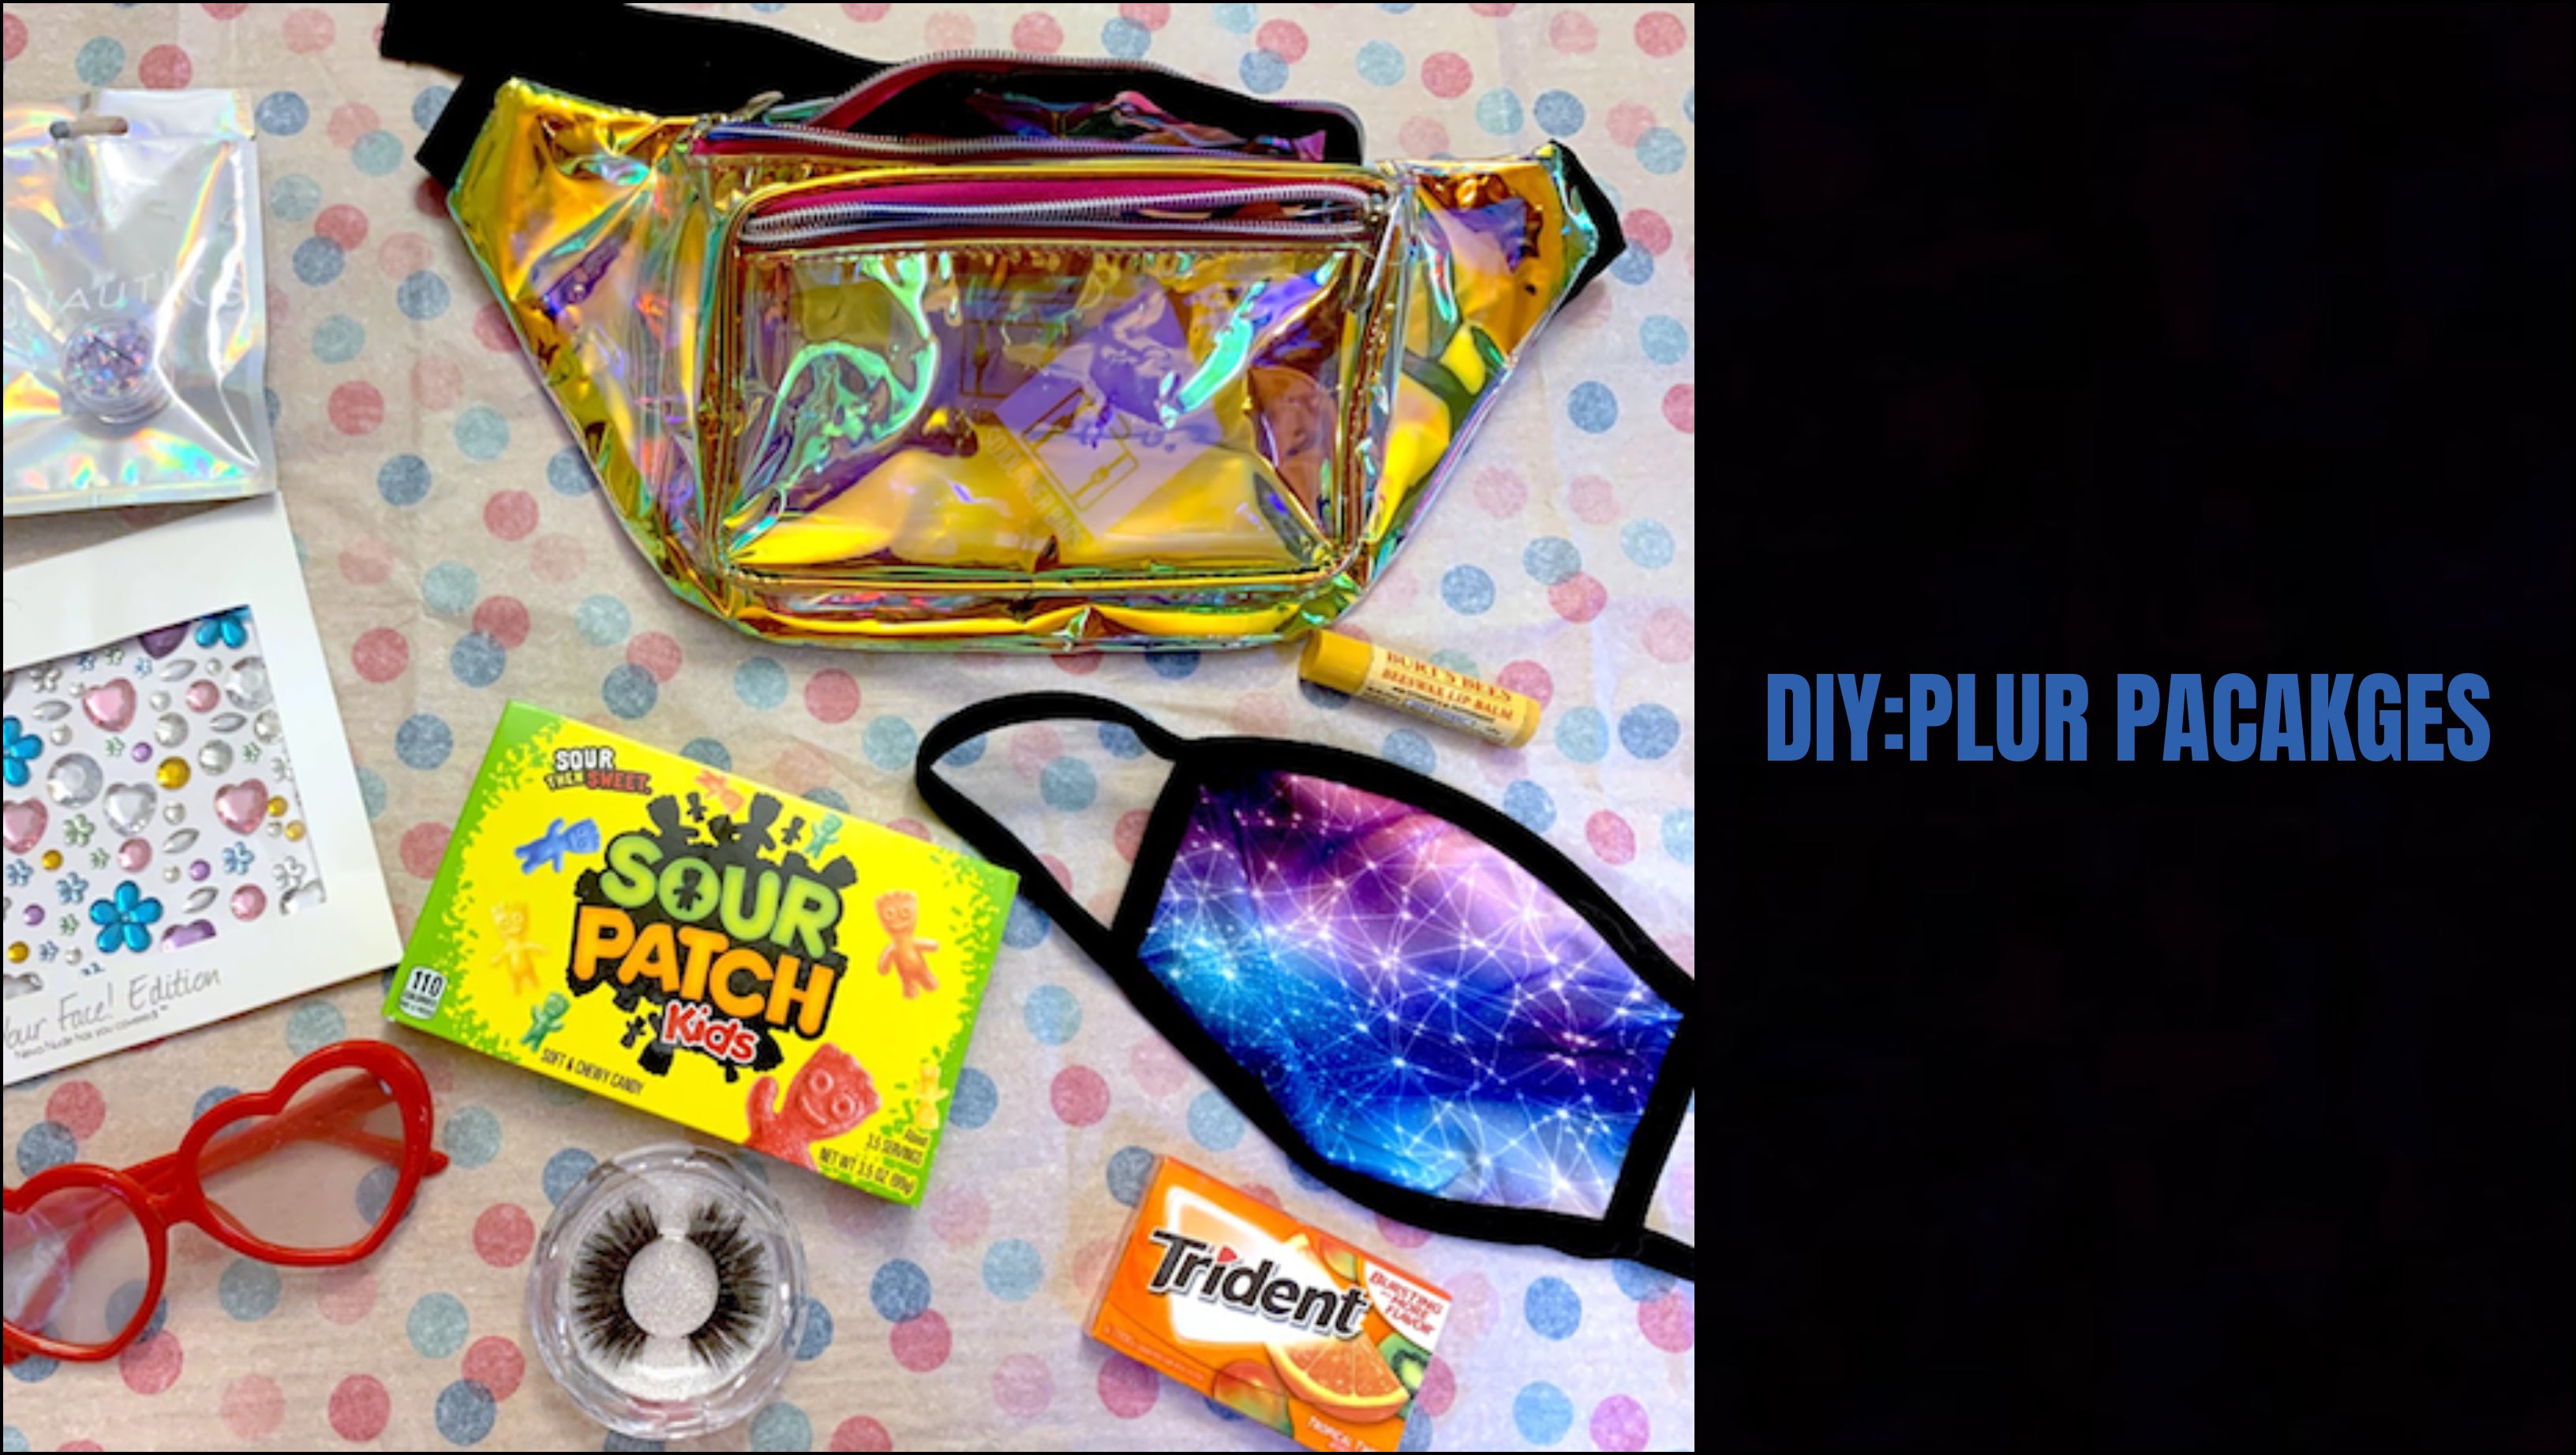 SOUR PATCH KIDS Printed Fanny Pack